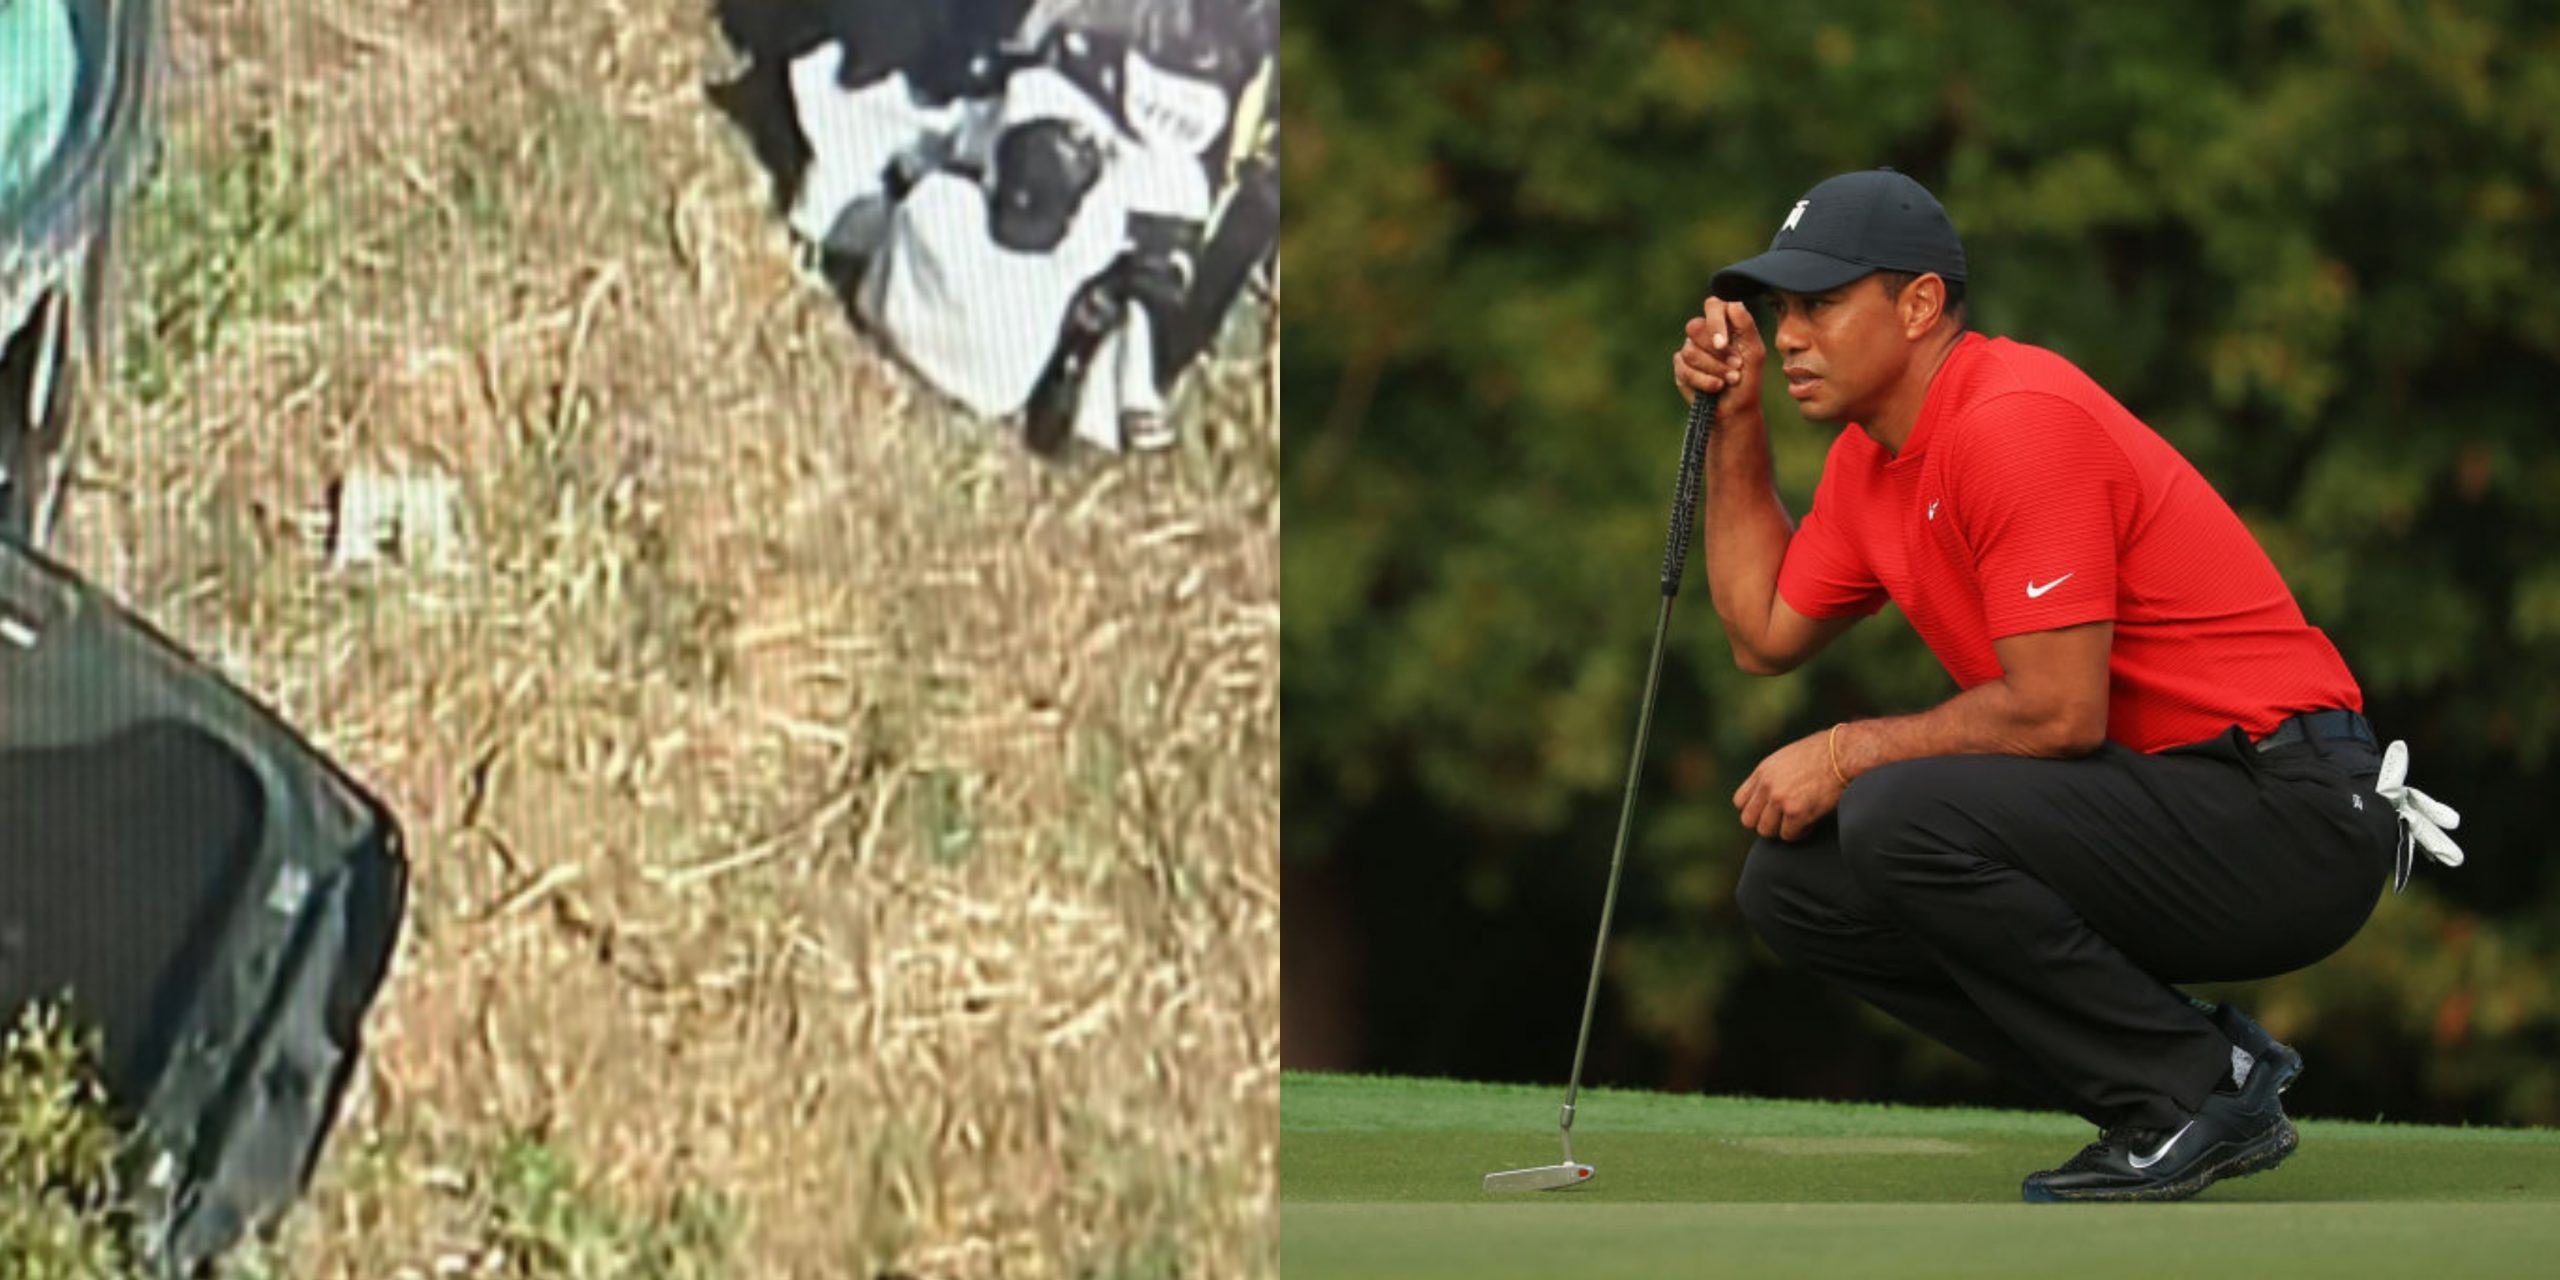 Movie released from the Tiger Woods rollover accident in California (VIDEO + PICS)